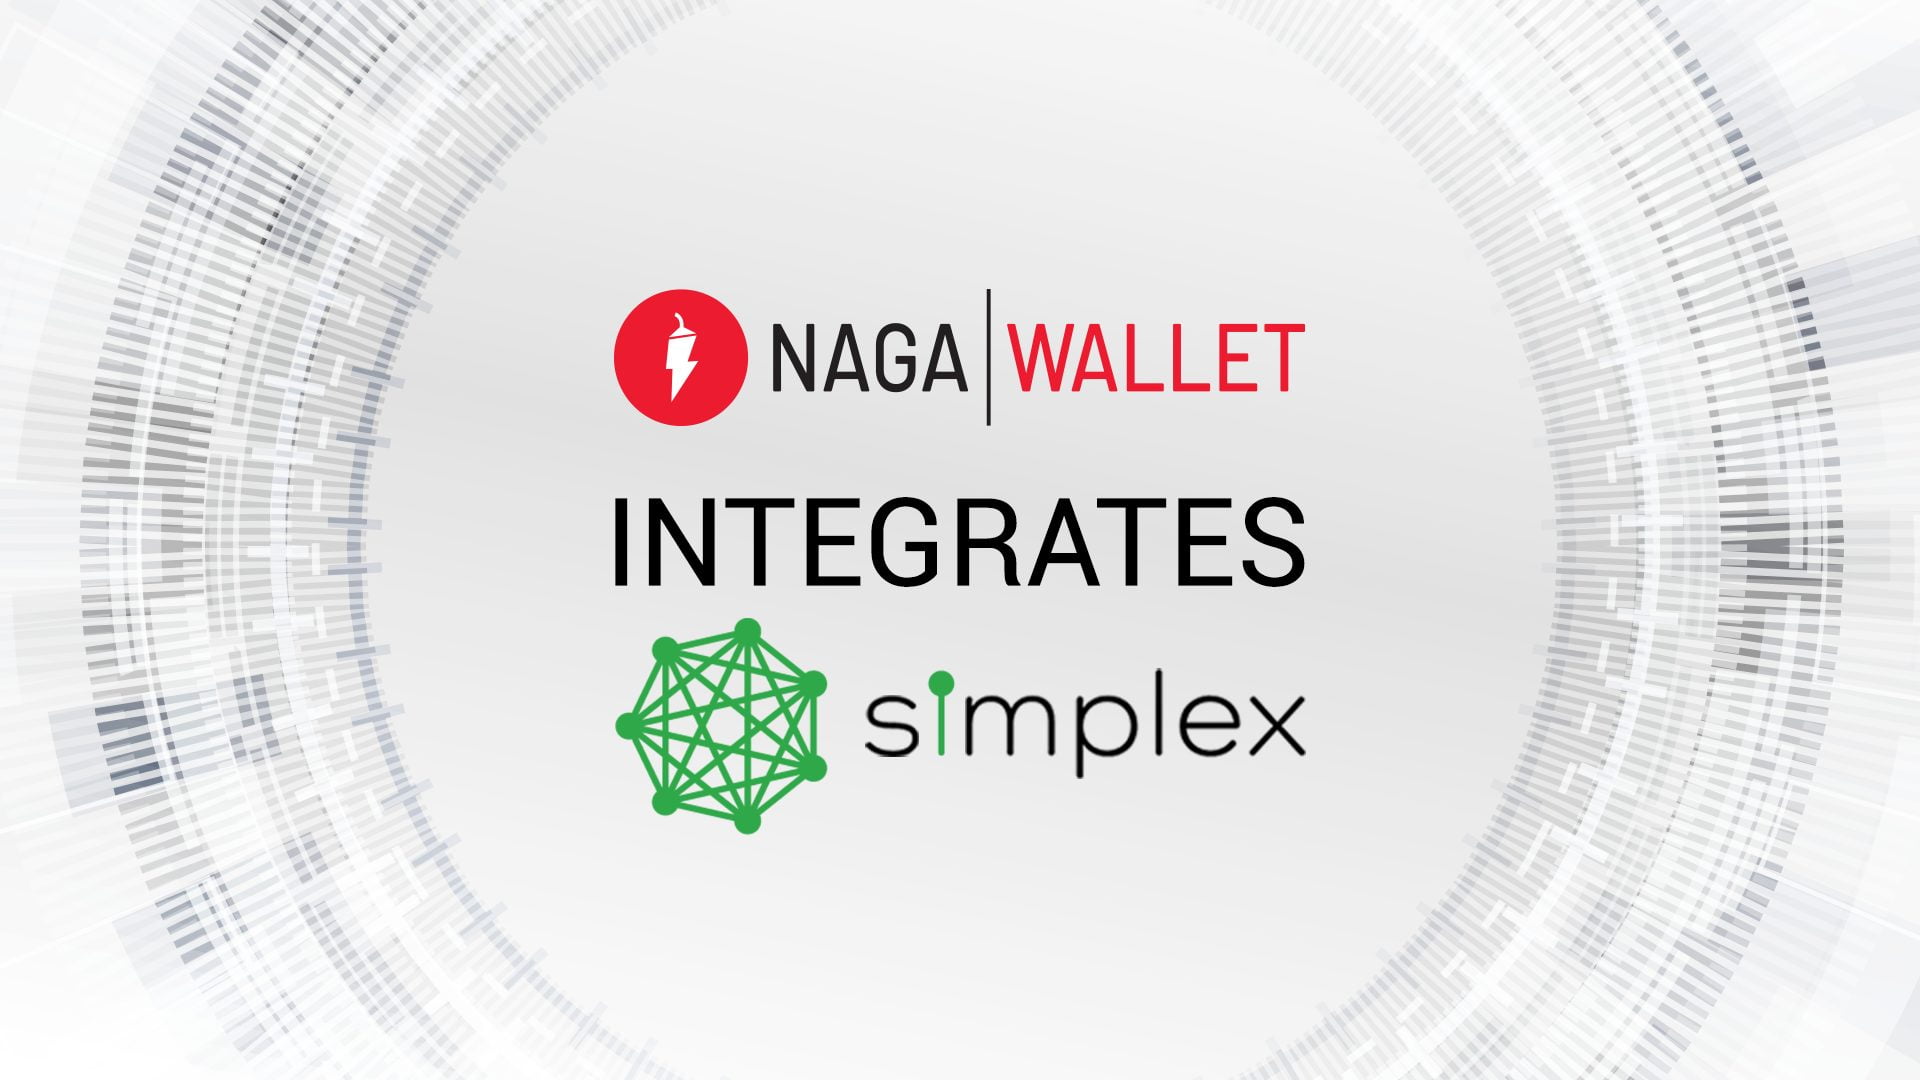 NAGA WALLET and Simplex Now Allowing Instant Credit Card Crypto Purchases